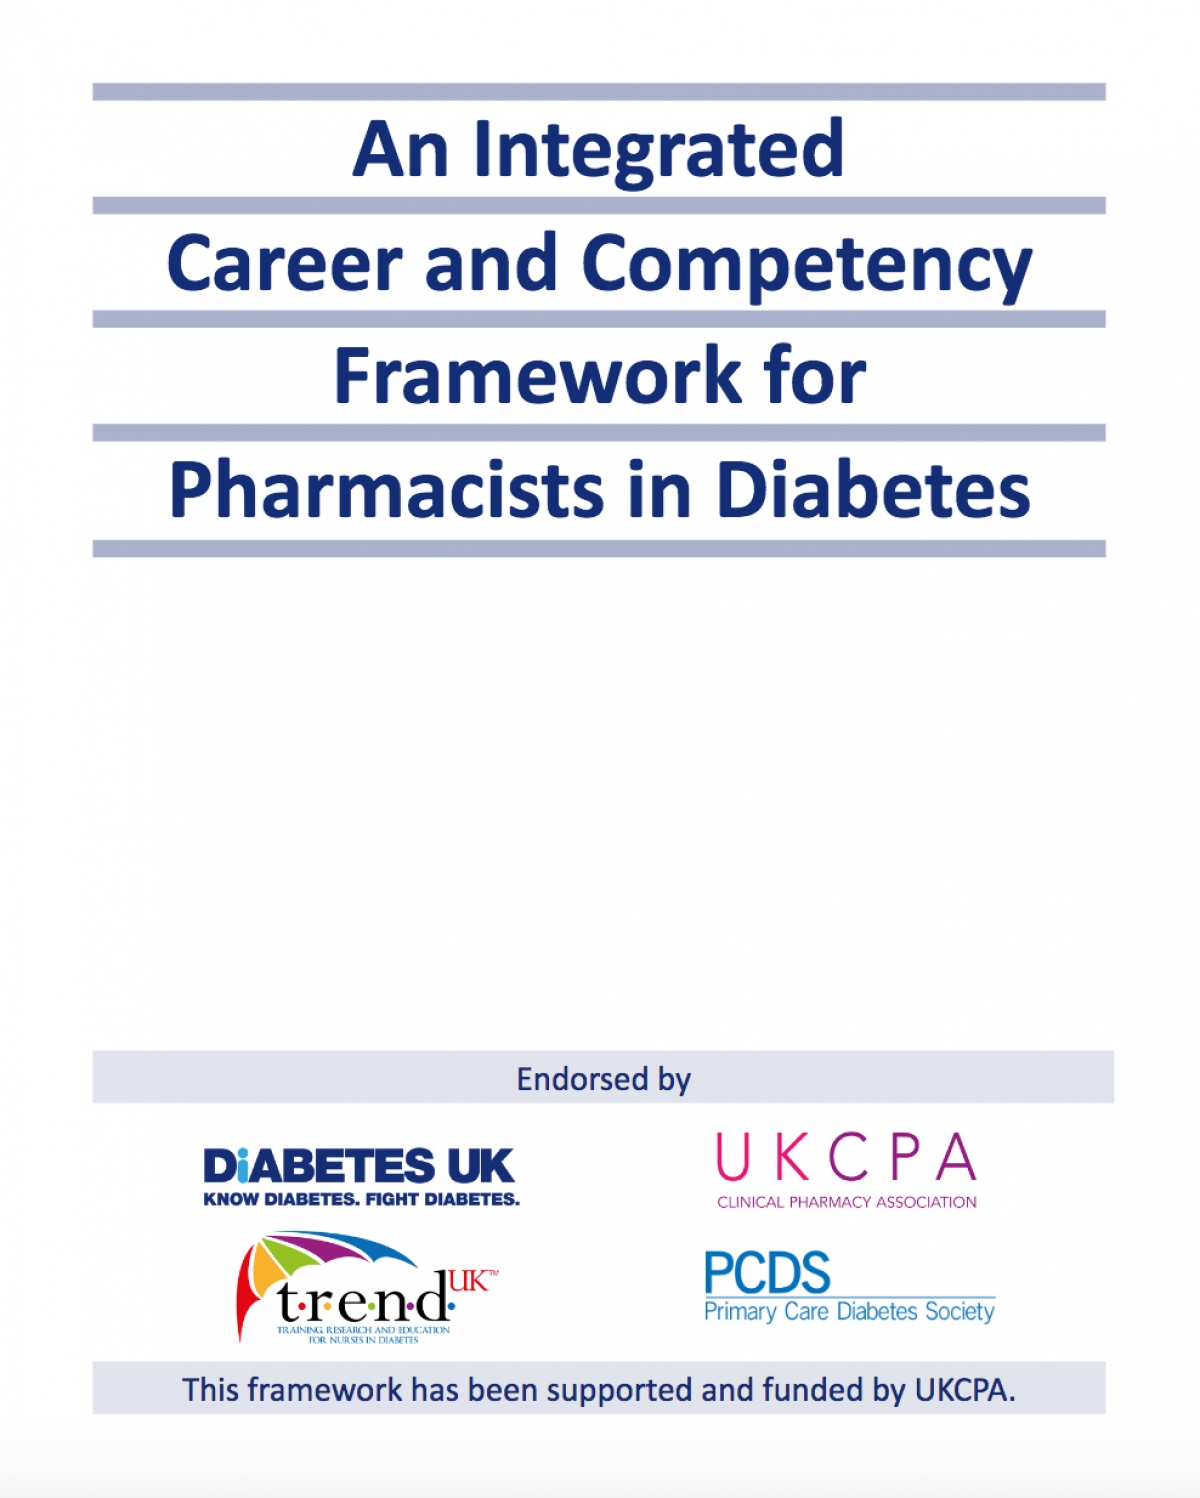 NEW Career And Competency Framework For Pharmacists In Diabetes Launched